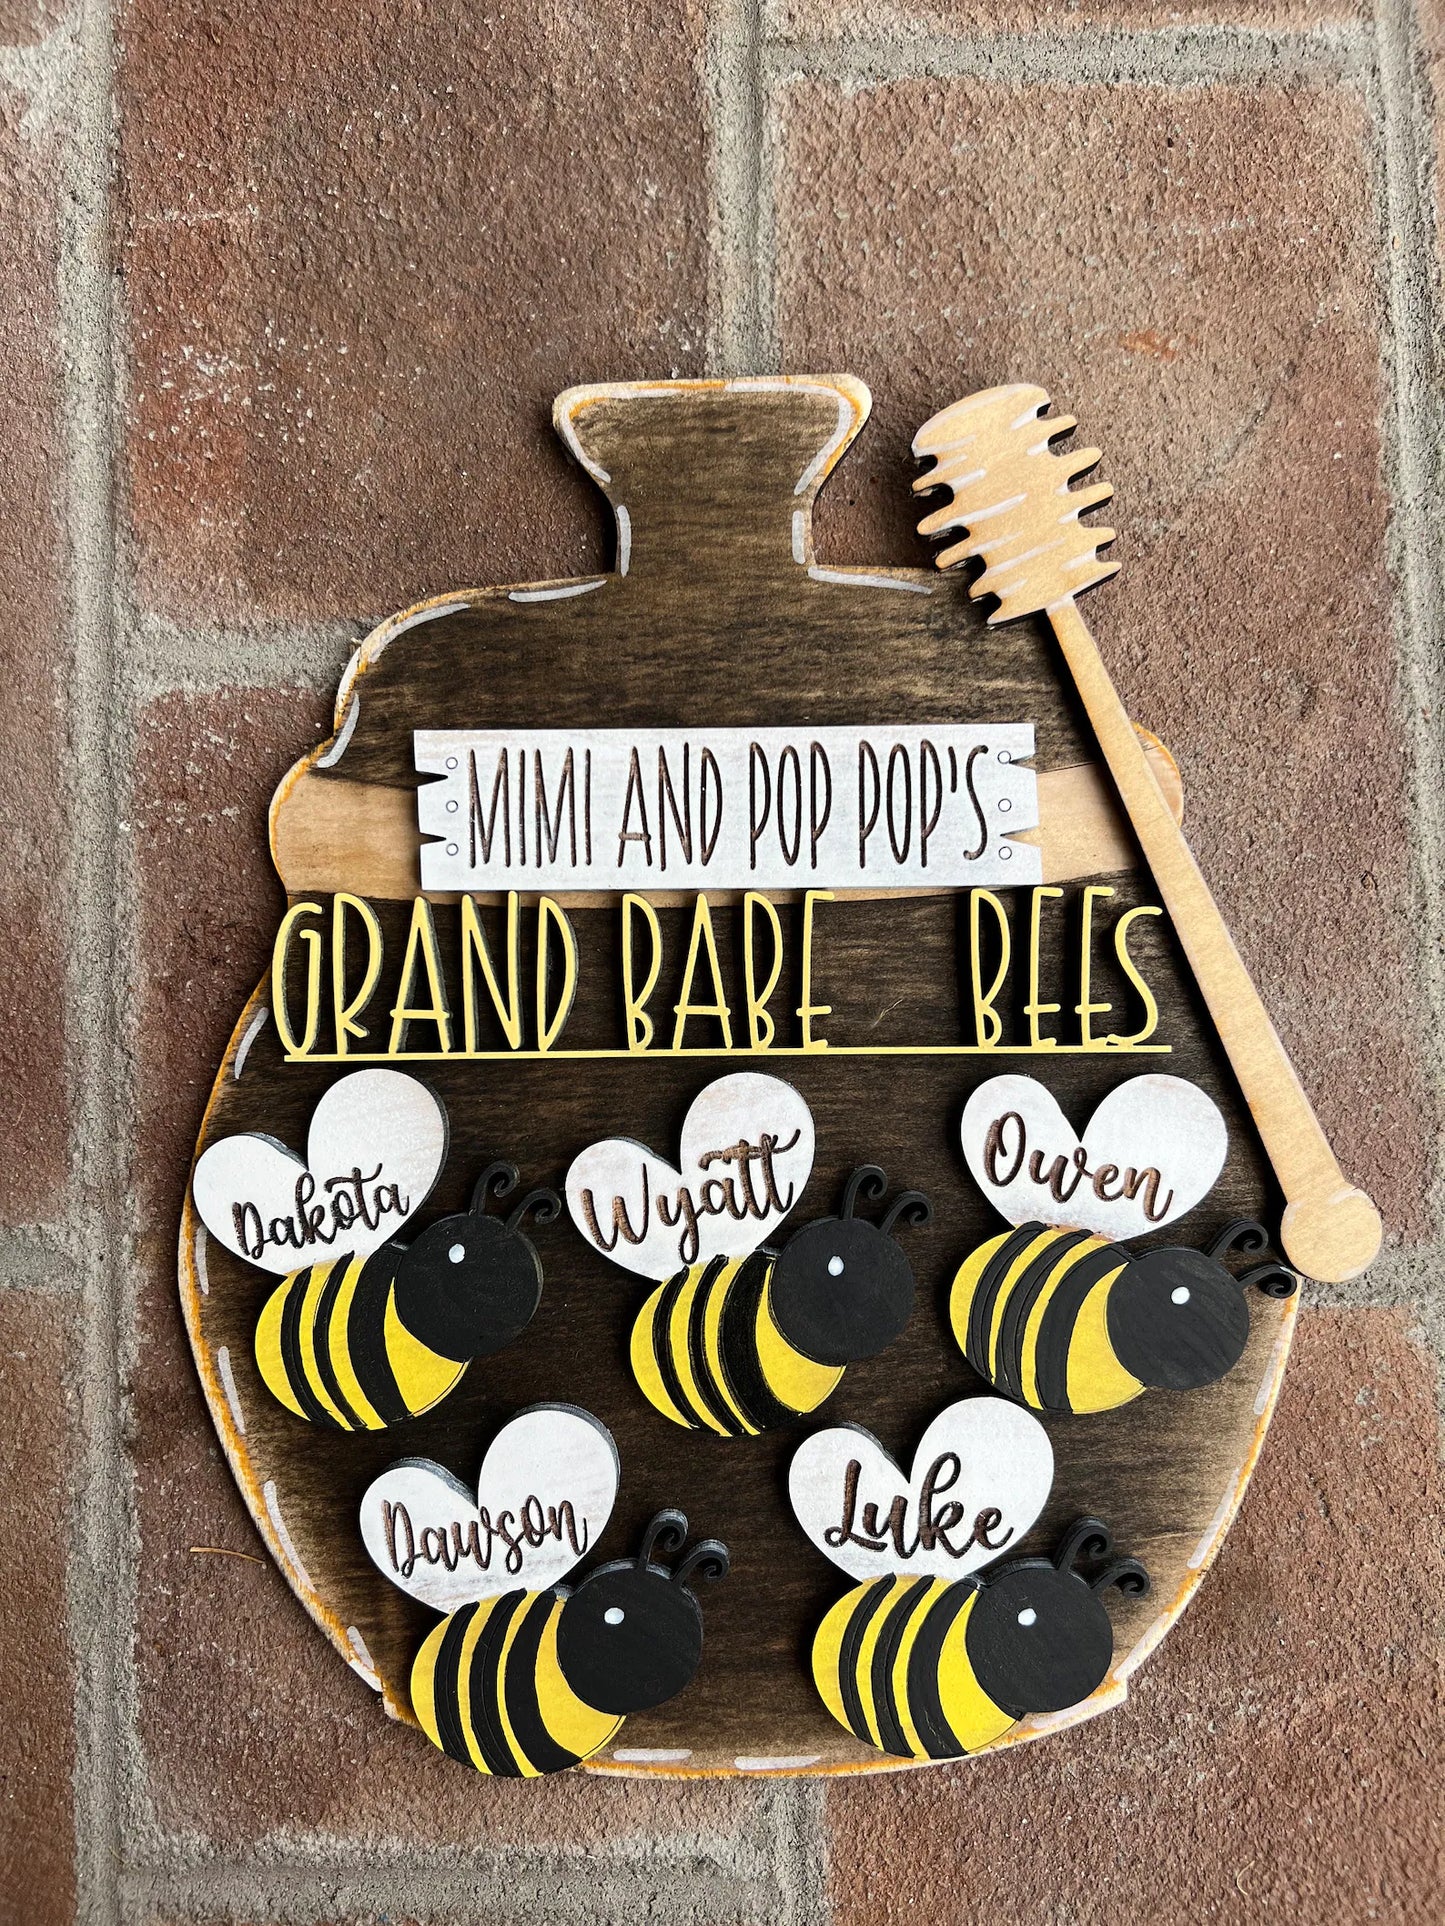 Personalized Grand Babe Bees Sign